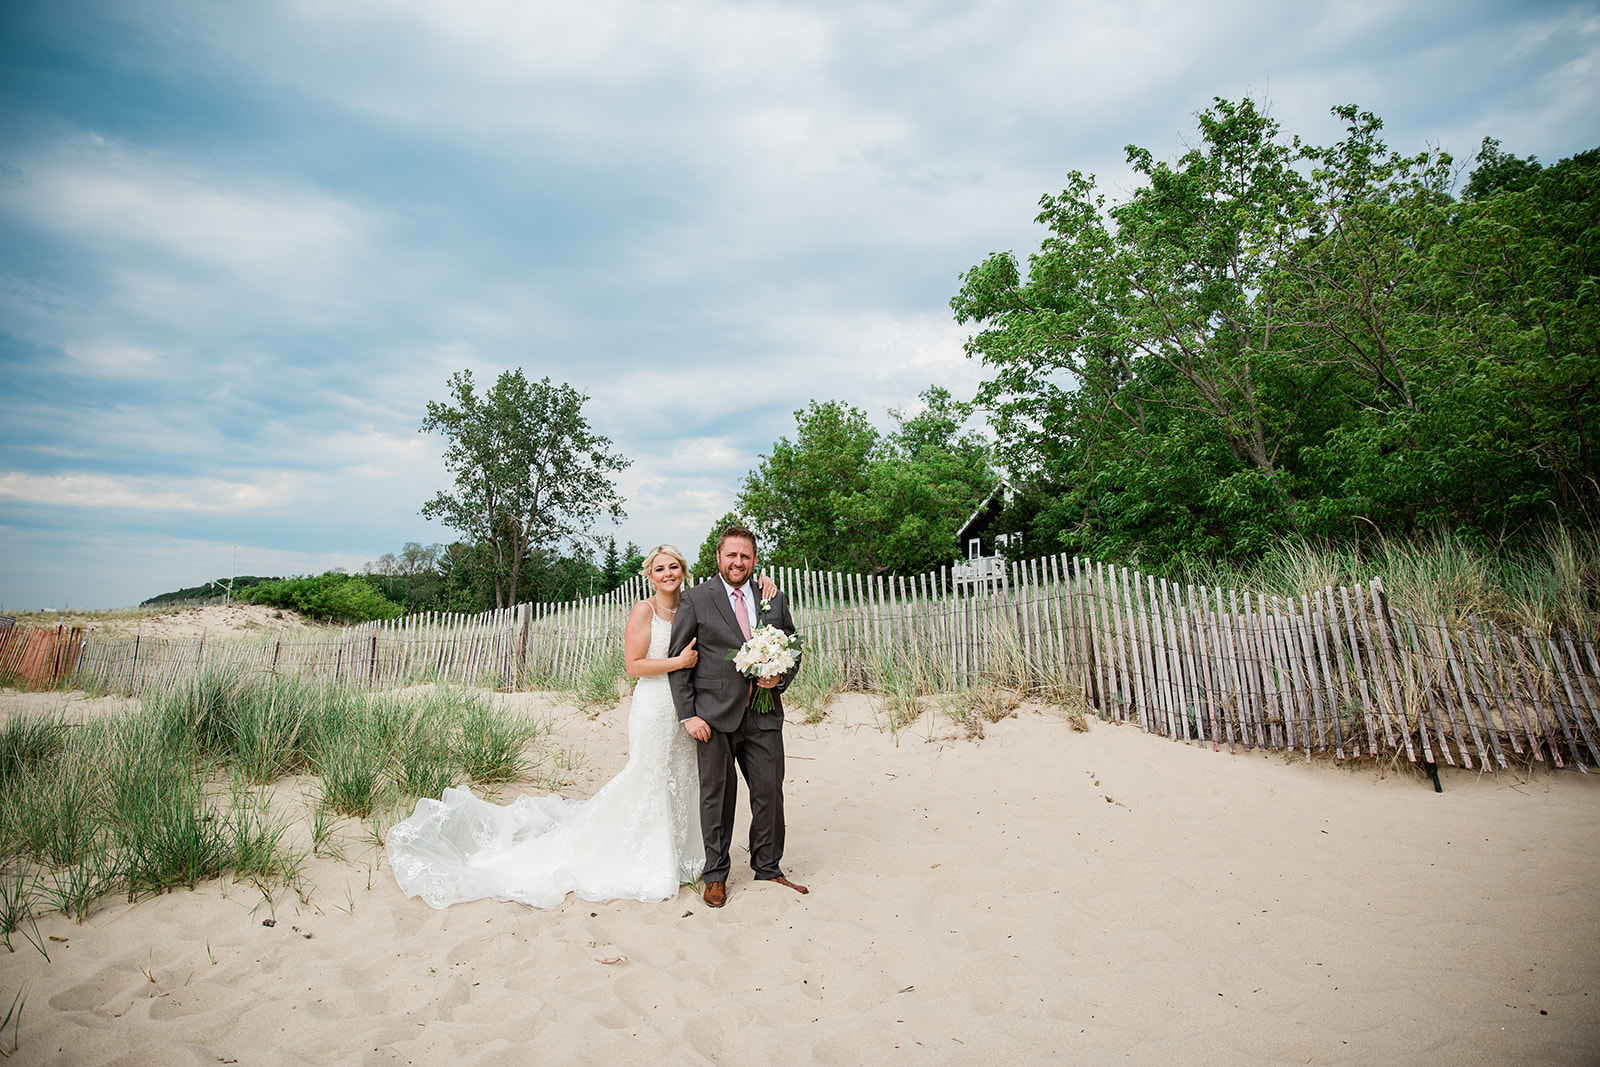 Caitlin + Mike standing on the Shores of Lake Michigan near Fishtown | Heirlooms and Lace Studios